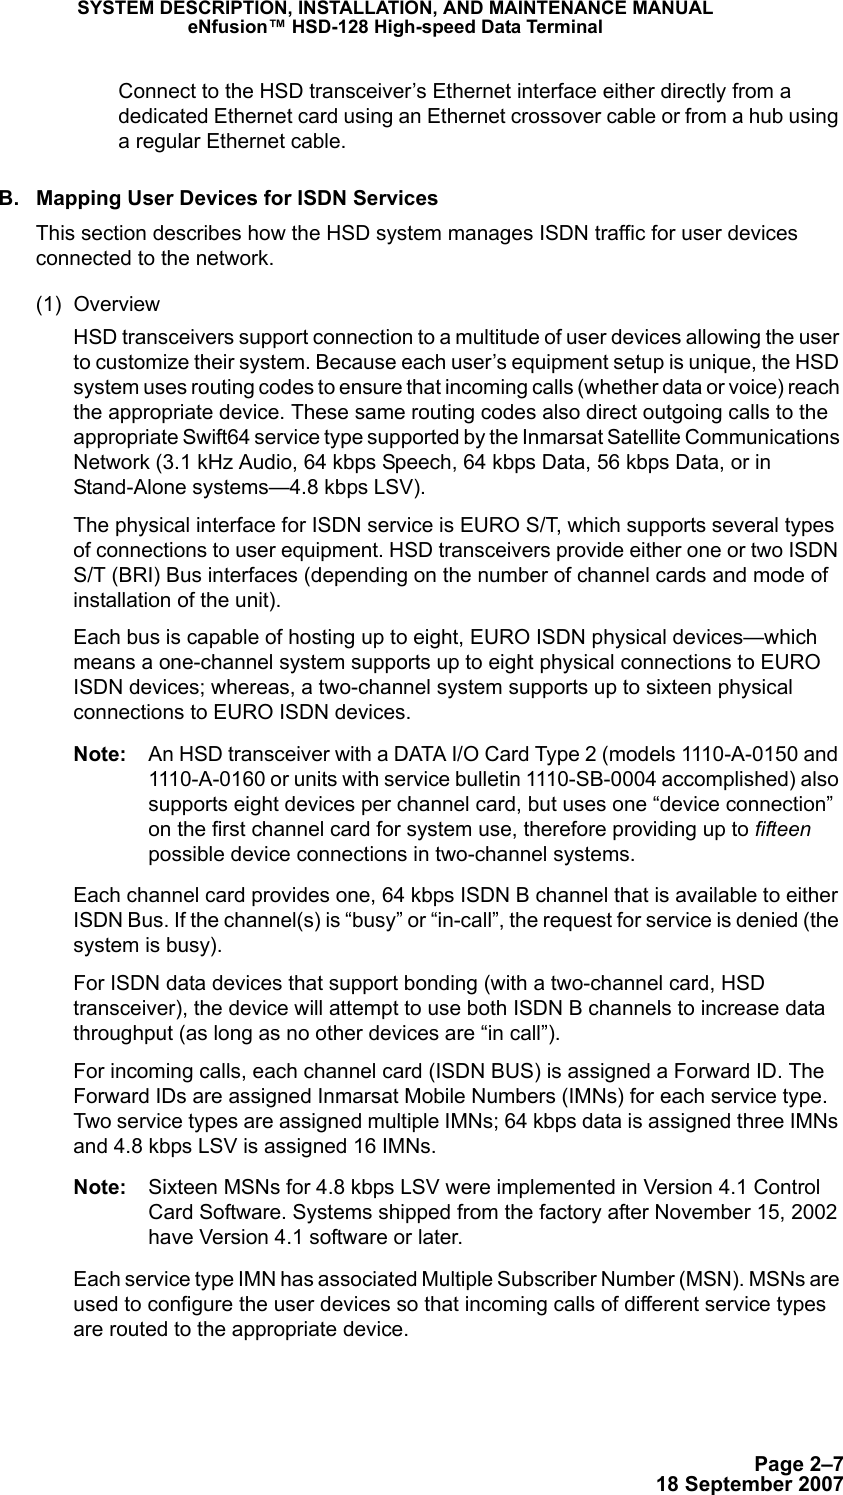 Page 2–718 September 2007SYSTEM DESCRIPTION, INSTALLATION, AND MAINTENANCE MANUALeNfusion™ HSD-128 High-speed Data TerminalConnect to the HSD transceiver’s Ethernet interface either directly from a dedicated Ethernet card using an Ethernet crossover cable or from a hub using a regular Ethernet cable.B. Mapping User Devices for ISDN ServicesThis section describes how the HSD system manages ISDN traffic for user devices connected to the network.(1) OverviewHSD transceivers support connection to a multitude of user devices allowing the user to customize their system. Because each user’s equipment setup is unique, the HSD system uses routing codes to ensure that incoming calls (whether data or voice) reach the appropriate device. These same routing codes also direct outgoing calls to the appropriate Swift64 service type supported by the Inmarsat Satellite Communications Network (3.1 kHz Audio, 64 kbps Speech, 64 kbps Data, 56 kbps Data, or in Stand-Alone systems—4.8 kbps LSV).The physical interface for ISDN service is EURO S/T, which supports several types of connections to user equipment. HSD transceivers provide either one or two ISDN S/T (BRI) Bus interfaces (depending on the number of channel cards and mode of installation of the unit).Each bus is capable of hosting up to eight, EURO ISDN physical devices—which means a one-channel system supports up to eight physical connections to EURO ISDN devices; whereas, a two-channel system supports up to sixteen physical connections to EURO ISDN devices. Note: An HSD transceiver with a DATA I/O Card Type 2 (models 1110-A-0150 and 1110-A-0160 or units with service bulletin 1110-SB-0004 accomplished) also supports eight devices per channel card, but uses one “device connection” on the first channel card for system use, therefore providing up to fifteen possible device connections in two-channel systems. Each channel card provides one, 64 kbps ISDN B channel that is available to either ISDN Bus. If the channel(s) is “busy” or “in-call”, the request for service is denied (the system is busy).For ISDN data devices that support bonding (with a two-channel card, HSD transceiver), the device will attempt to use both ISDN B channels to increase data throughput (as long as no other devices are “in call”).For incoming calls, each channel card (ISDN BUS) is assigned a Forward ID. The Forward IDs are assigned Inmarsat Mobile Numbers (IMNs) for each service type. Two service types are assigned multiple IMNs; 64 kbps data is assigned three IMNs and 4.8 kbps LSV is assigned 16 IMNs.Note: Sixteen MSNs for 4.8 kbps LSV were implemented in Version 4.1 Control Card Software. Systems shipped from the factory after November 15, 2002 have Version 4.1 software or later.Each service type IMN has associated Multiple Subscriber Number (MSN). MSNs are used to configure the user devices so that incoming calls of different service types are routed to the appropriate device. 